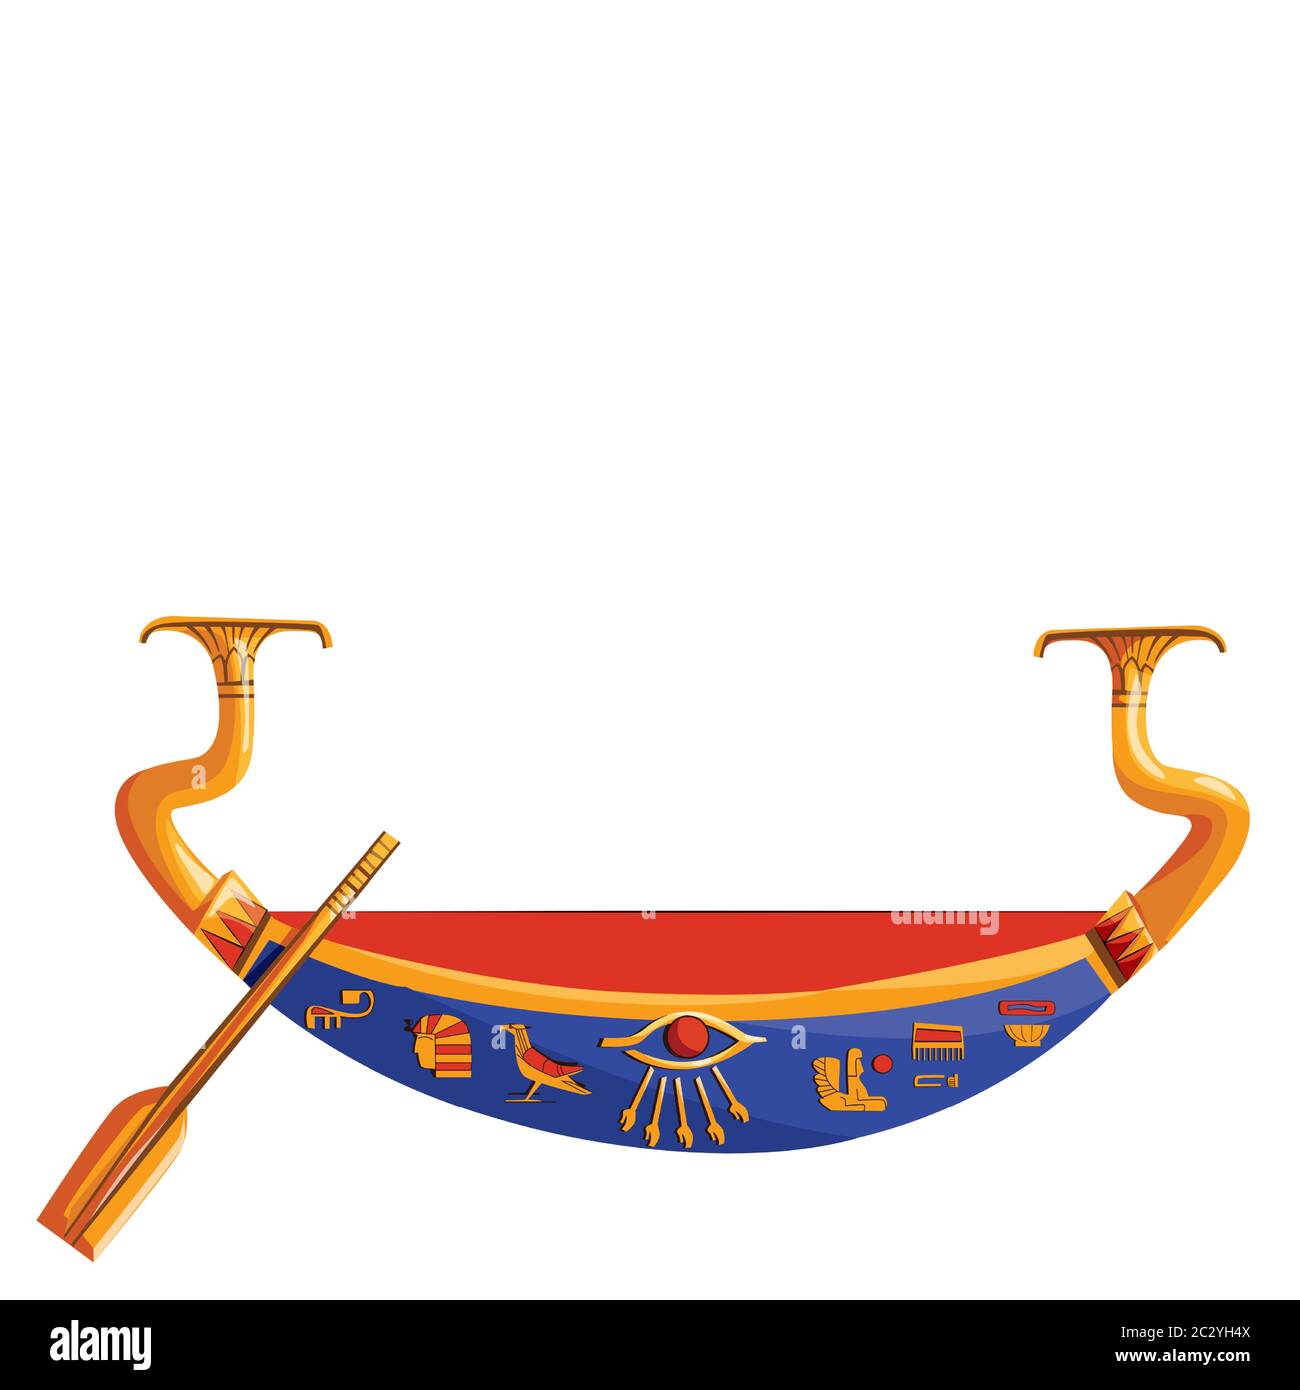 Ancient Egypt wooden boat with paddle for sun god trip cartoon vector illustration. Egyptian culture religious symbol, decorated barque with oar for a Stock Vector